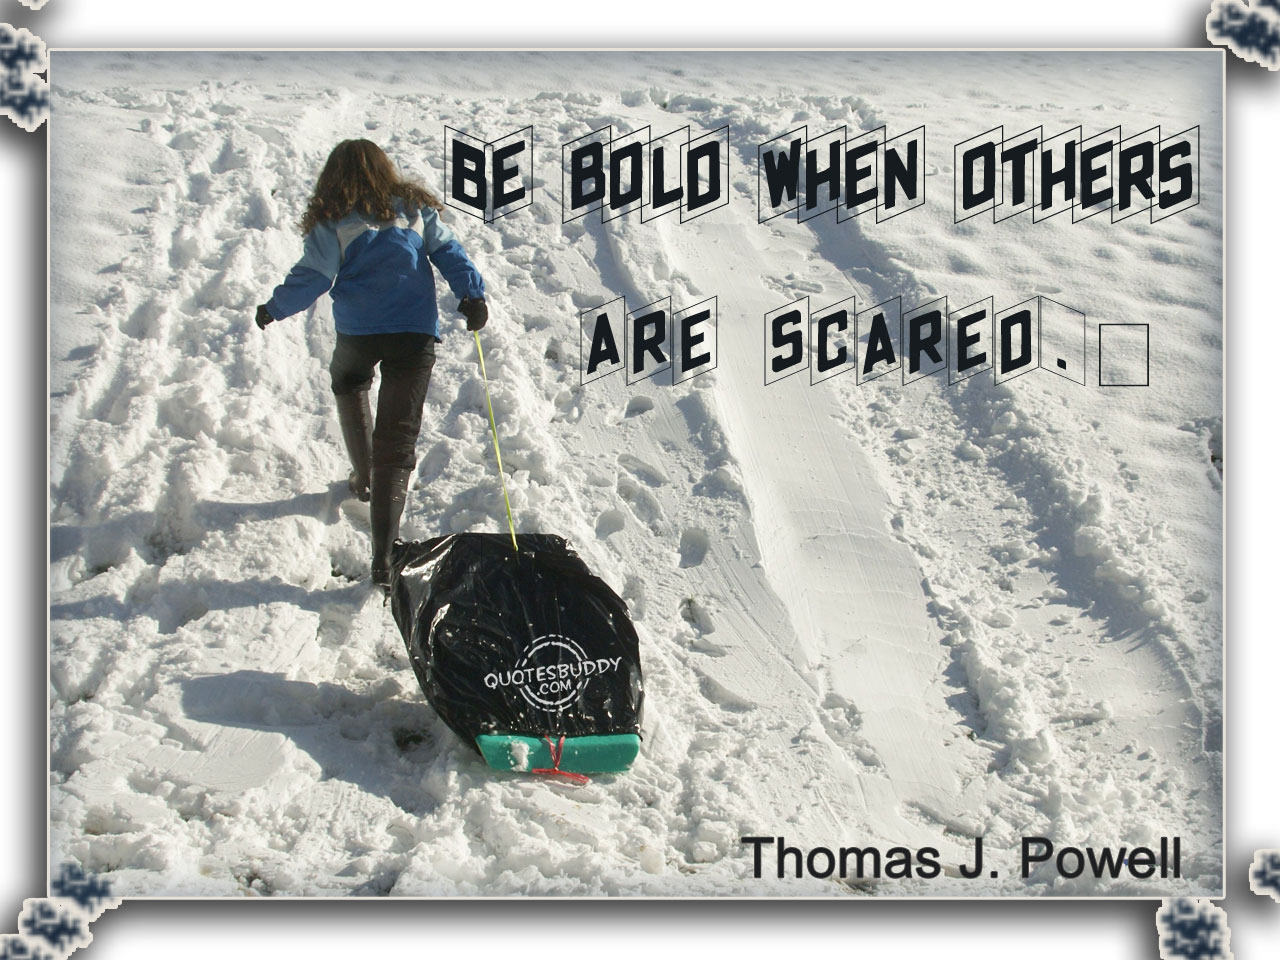 Be Bold When Others Are Scared. Thomas J. Powell